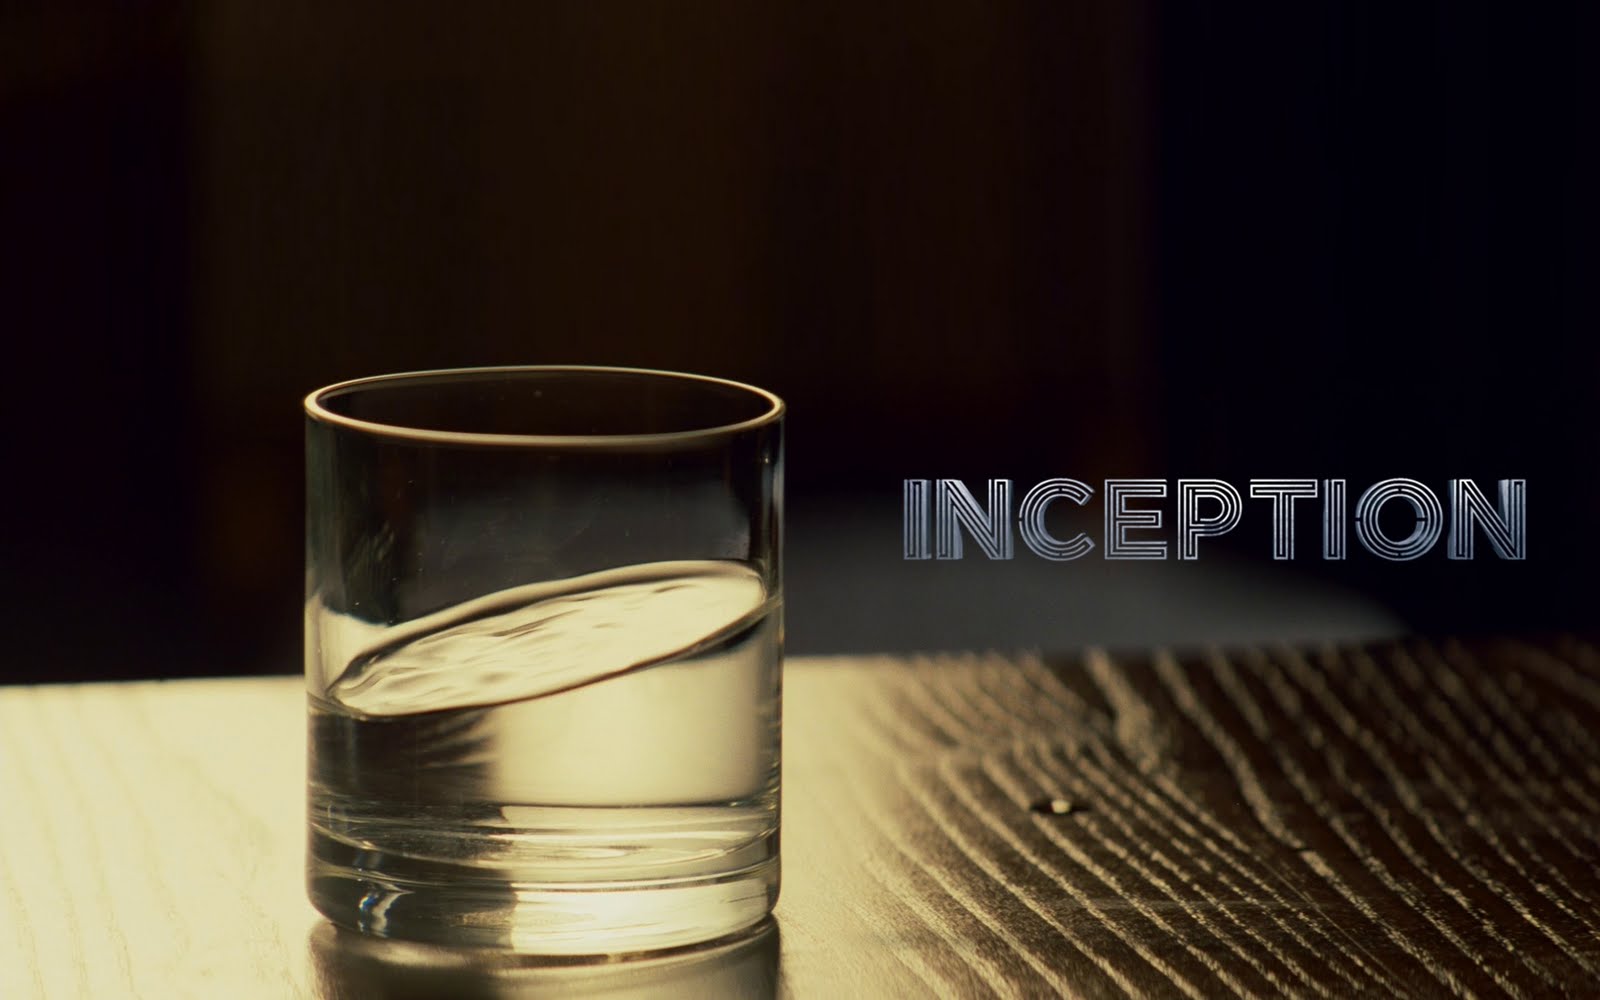 Inception Movie Poster HD Wallpaper